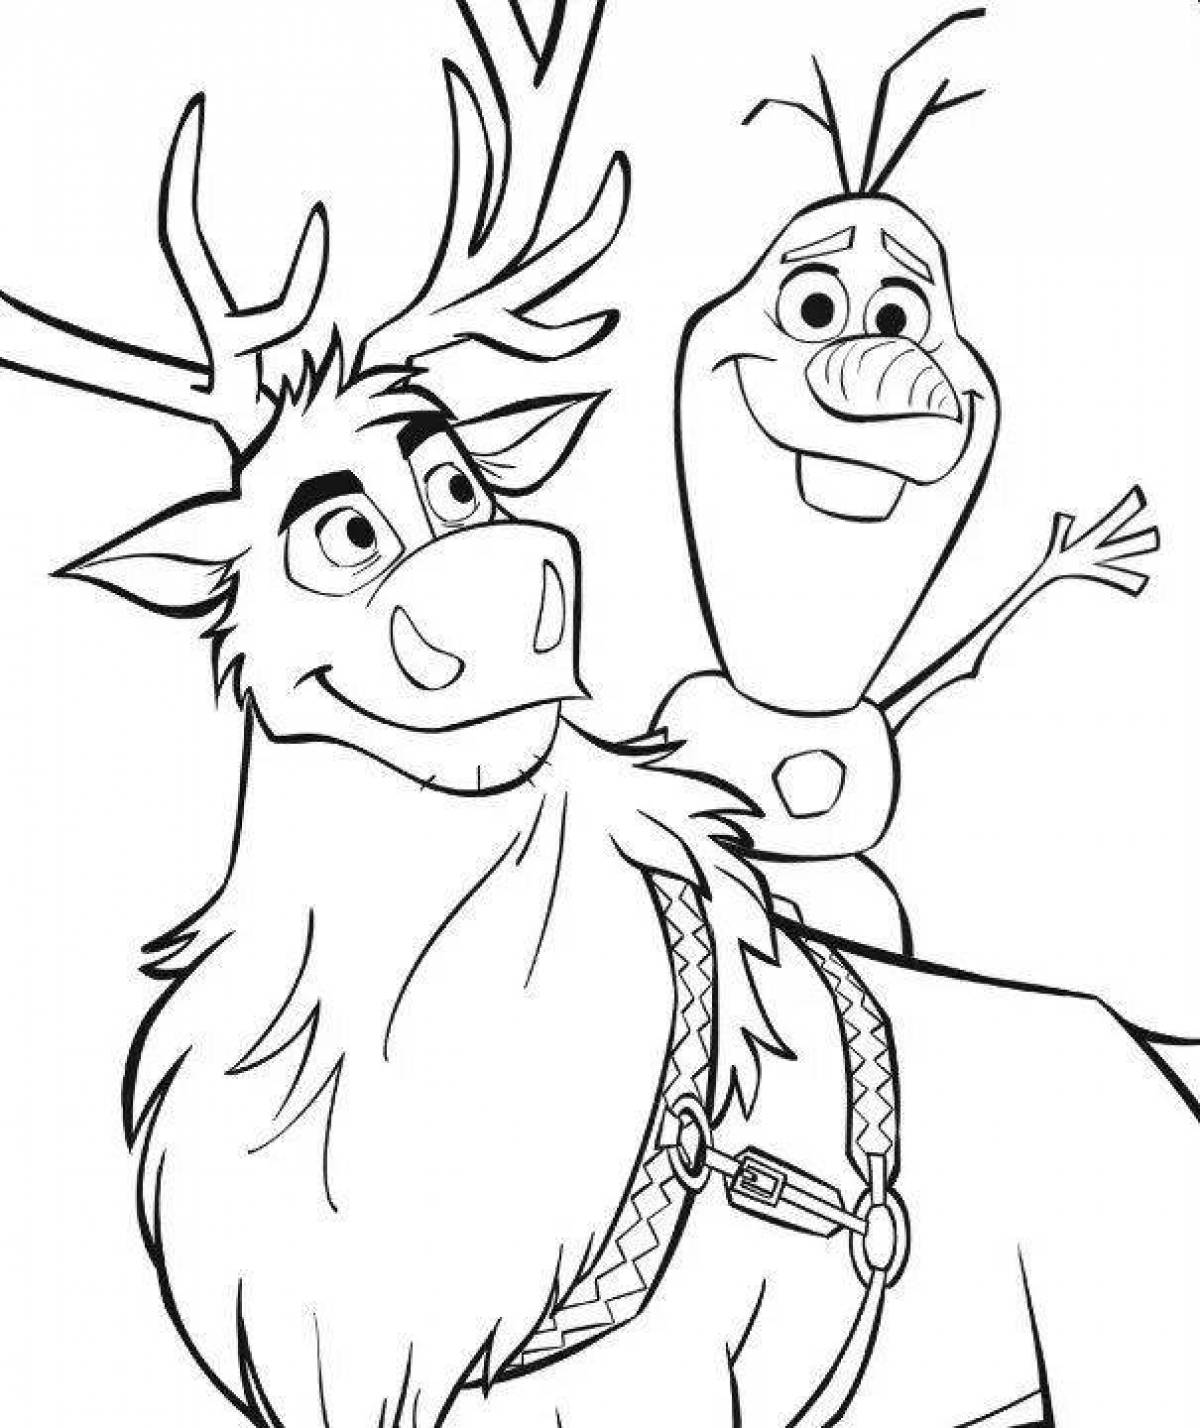 Playful cold heart coloring page